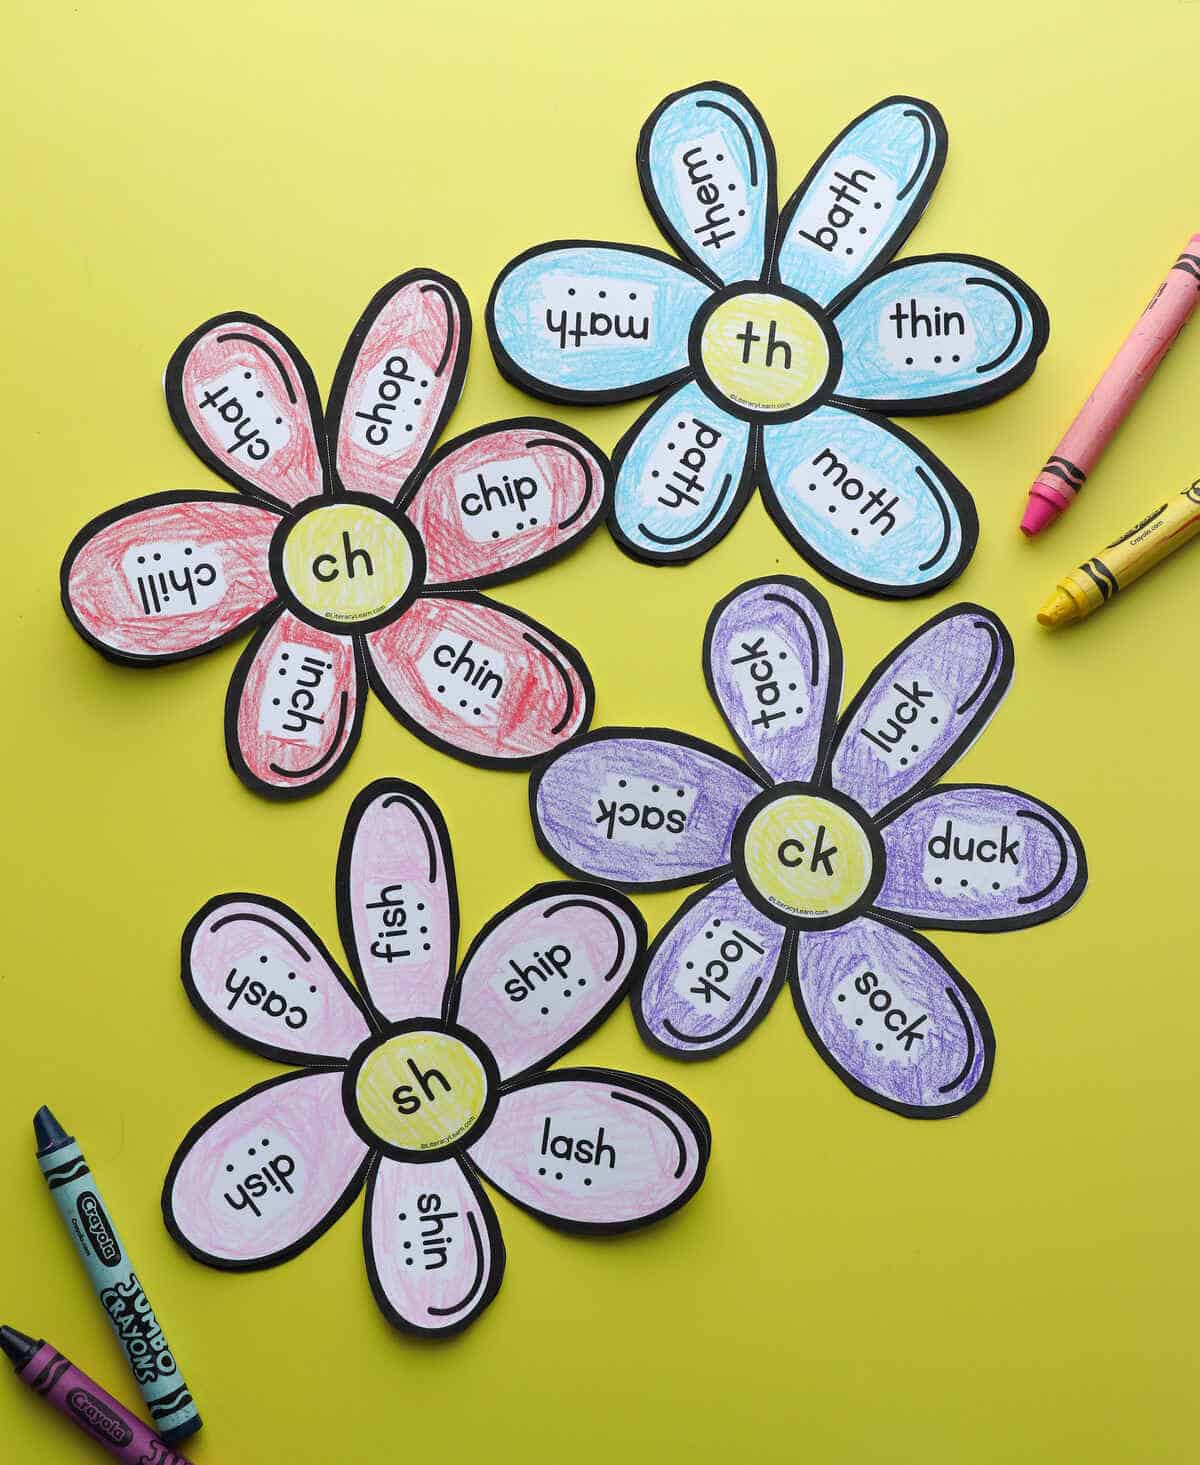 Four read-and-spell flowers with crayons, each with words featuring different digraphs.